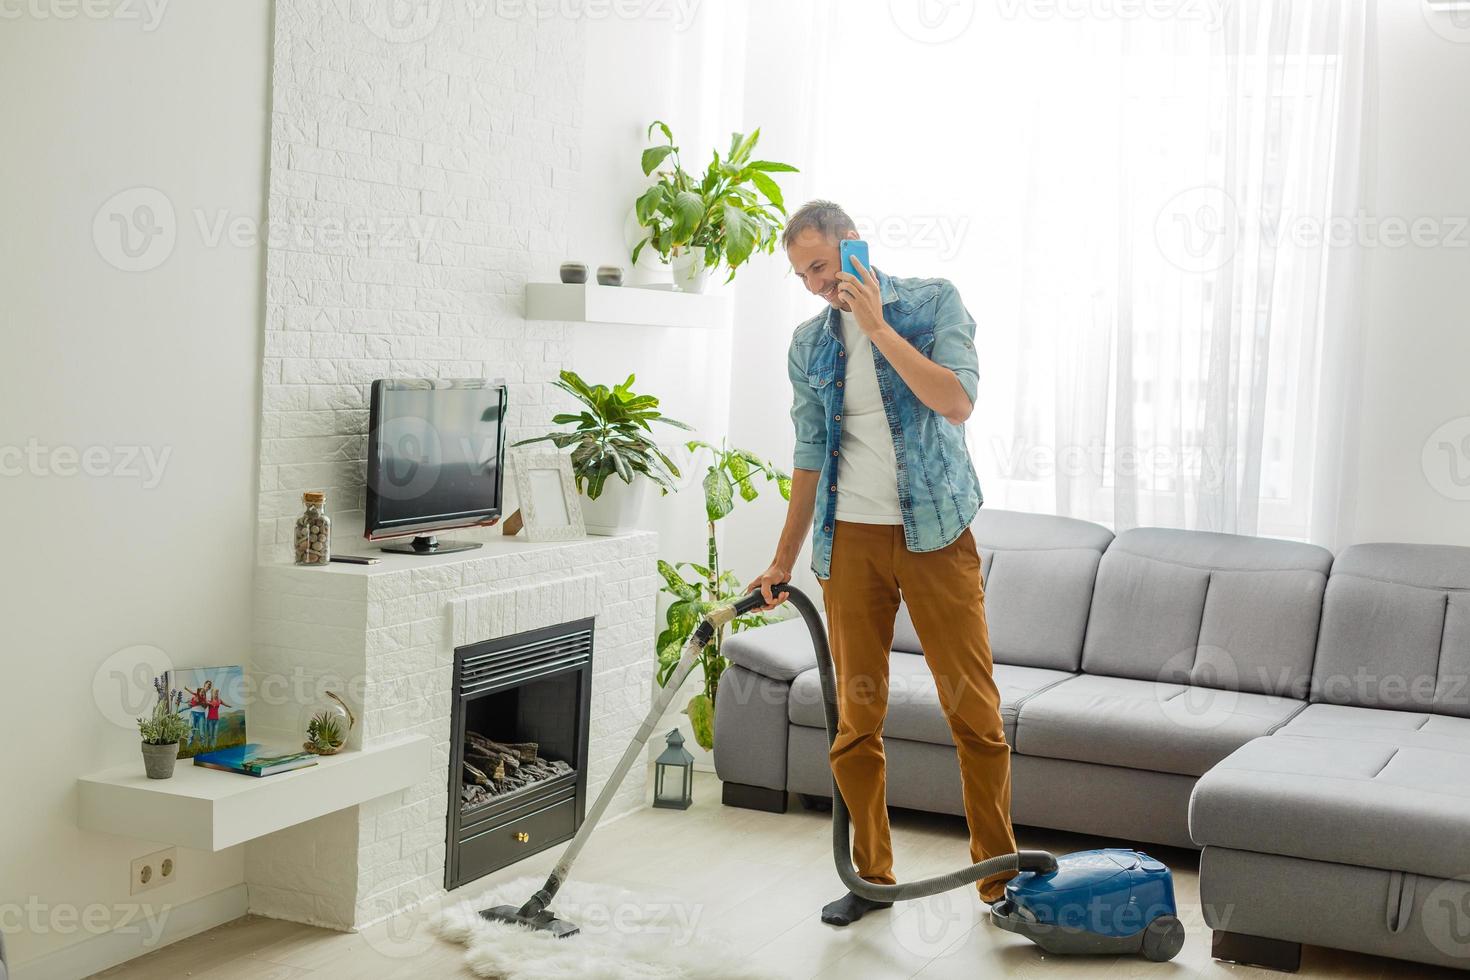 Caucasian handsome serious young man vacuuming cleaning modern apartment, clean up, housekeeper, guy doing domestic tasks and cleans living room using vacuum cleaner, householding photo